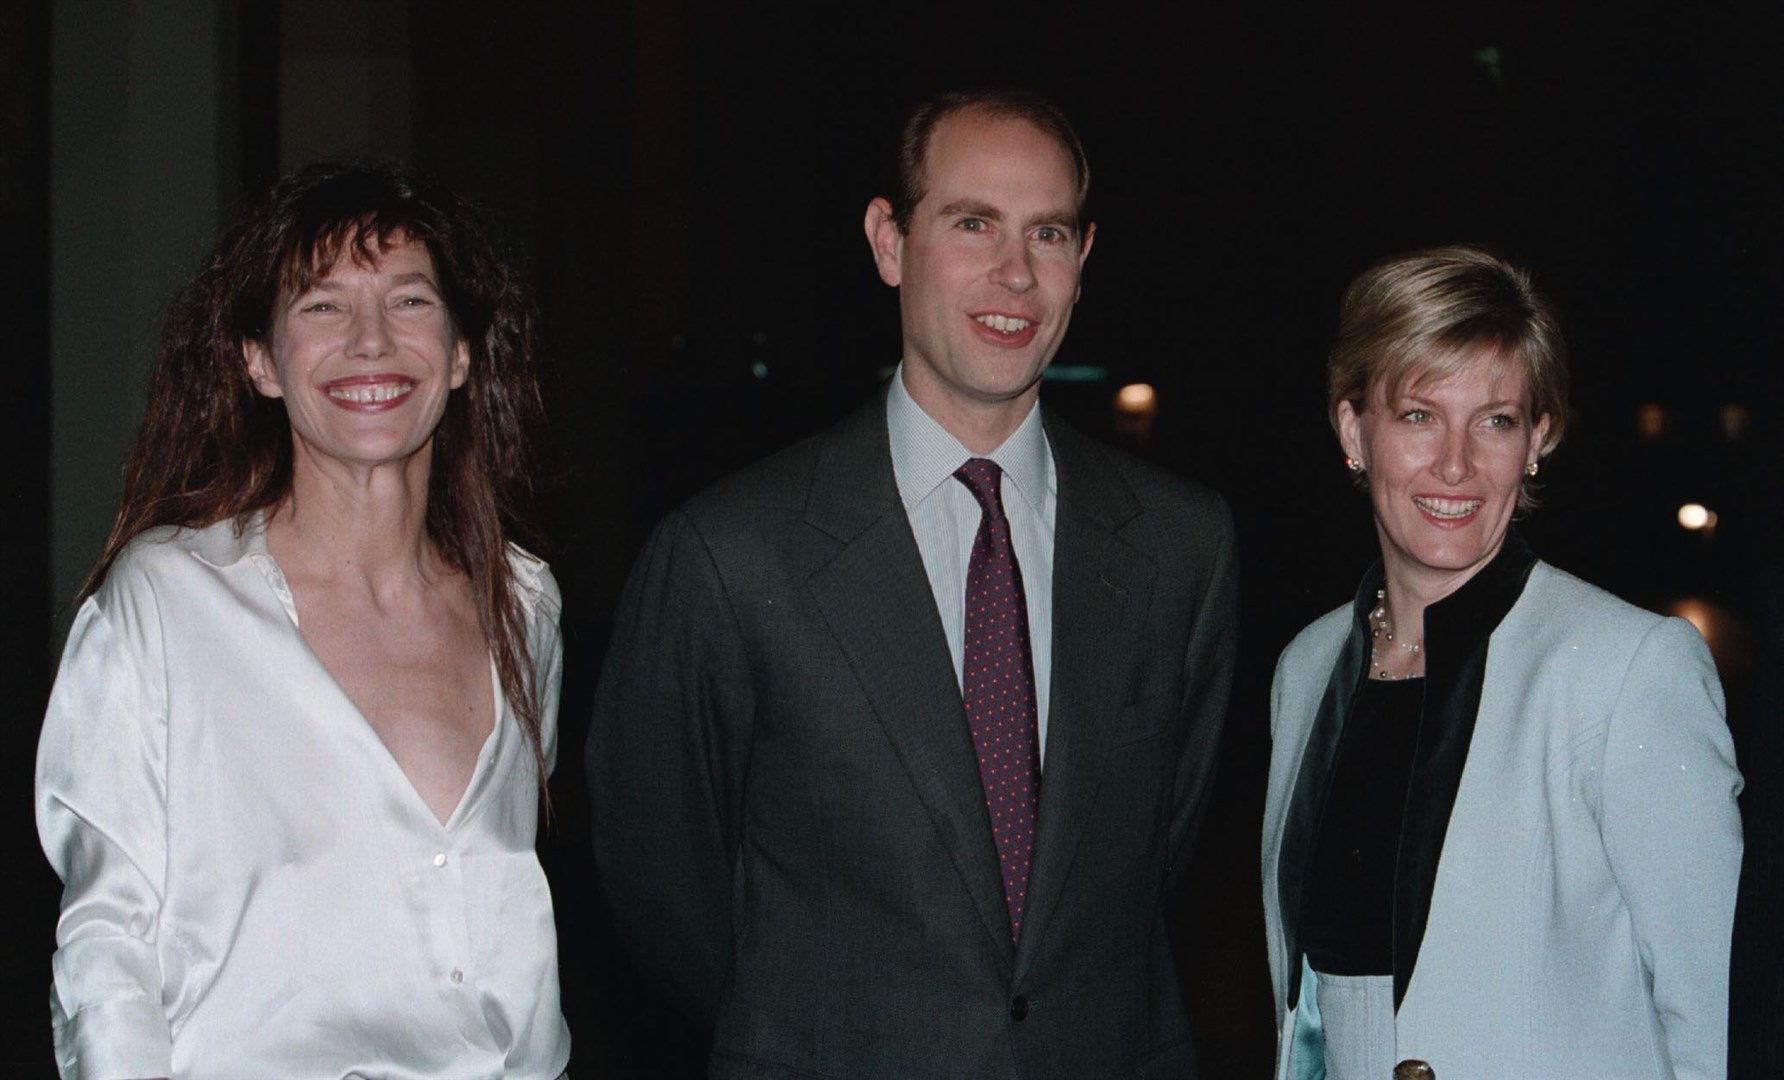 Jane Birkin with Edward, then Earl of Wessex, and Sophie, then Countess of Wessex, at a gala dinner during the British Film Festival in Dinard, France, in 1999(Matthew Fearn/PA)